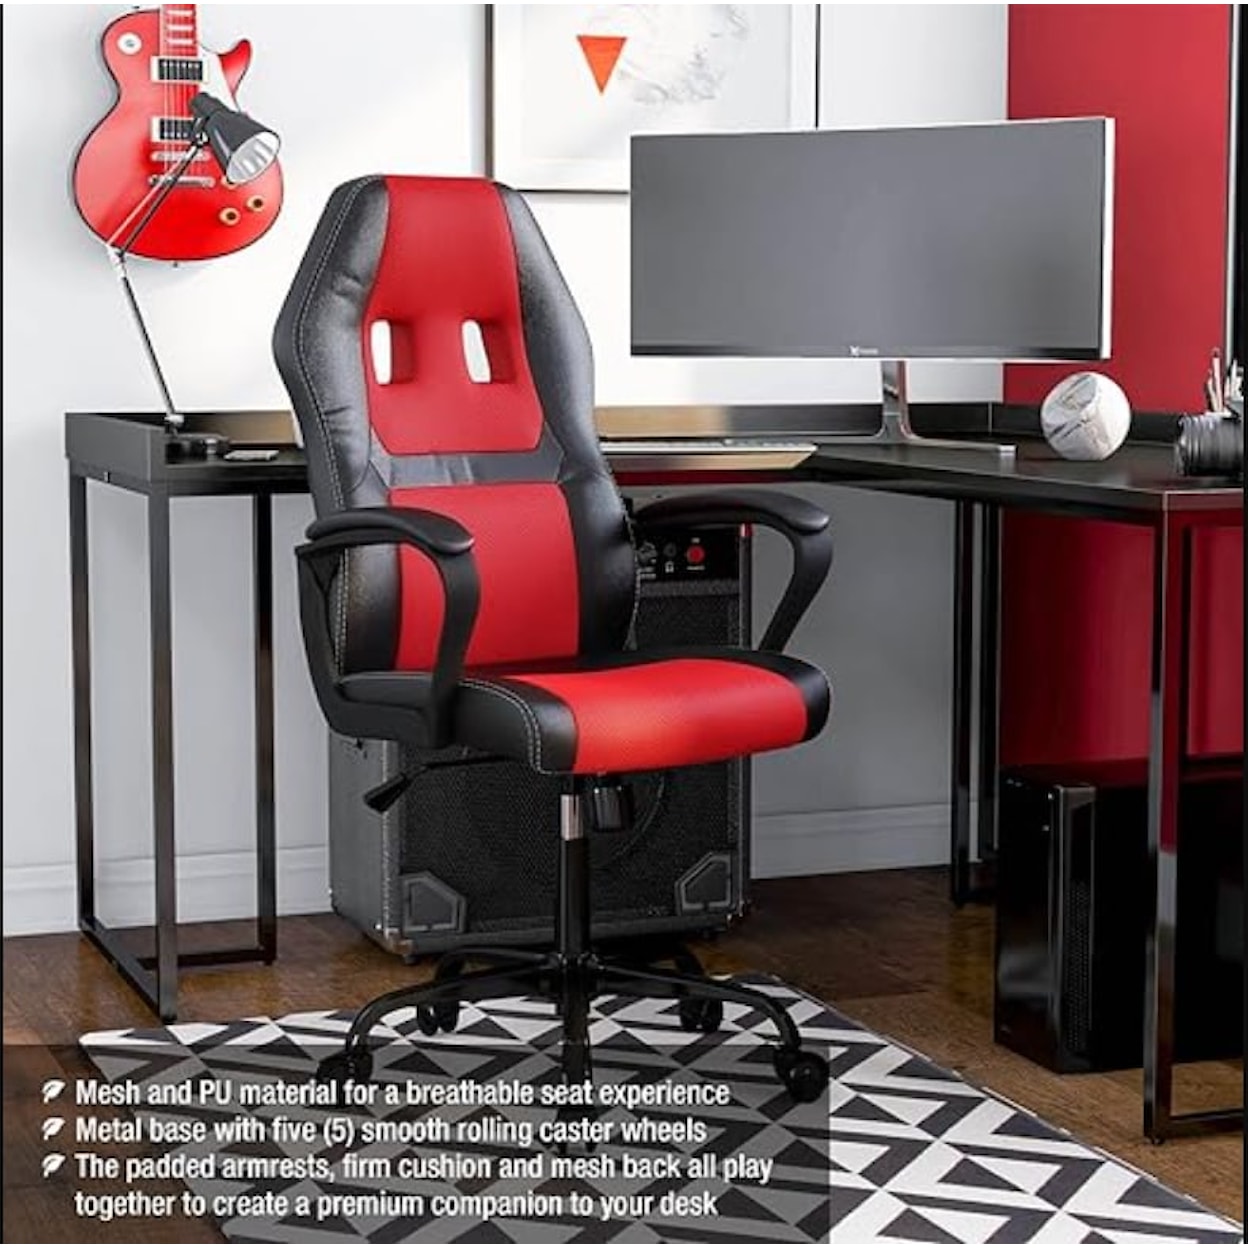 Furniture of America Office Chair RED & BLACK GAMING CHAIR |